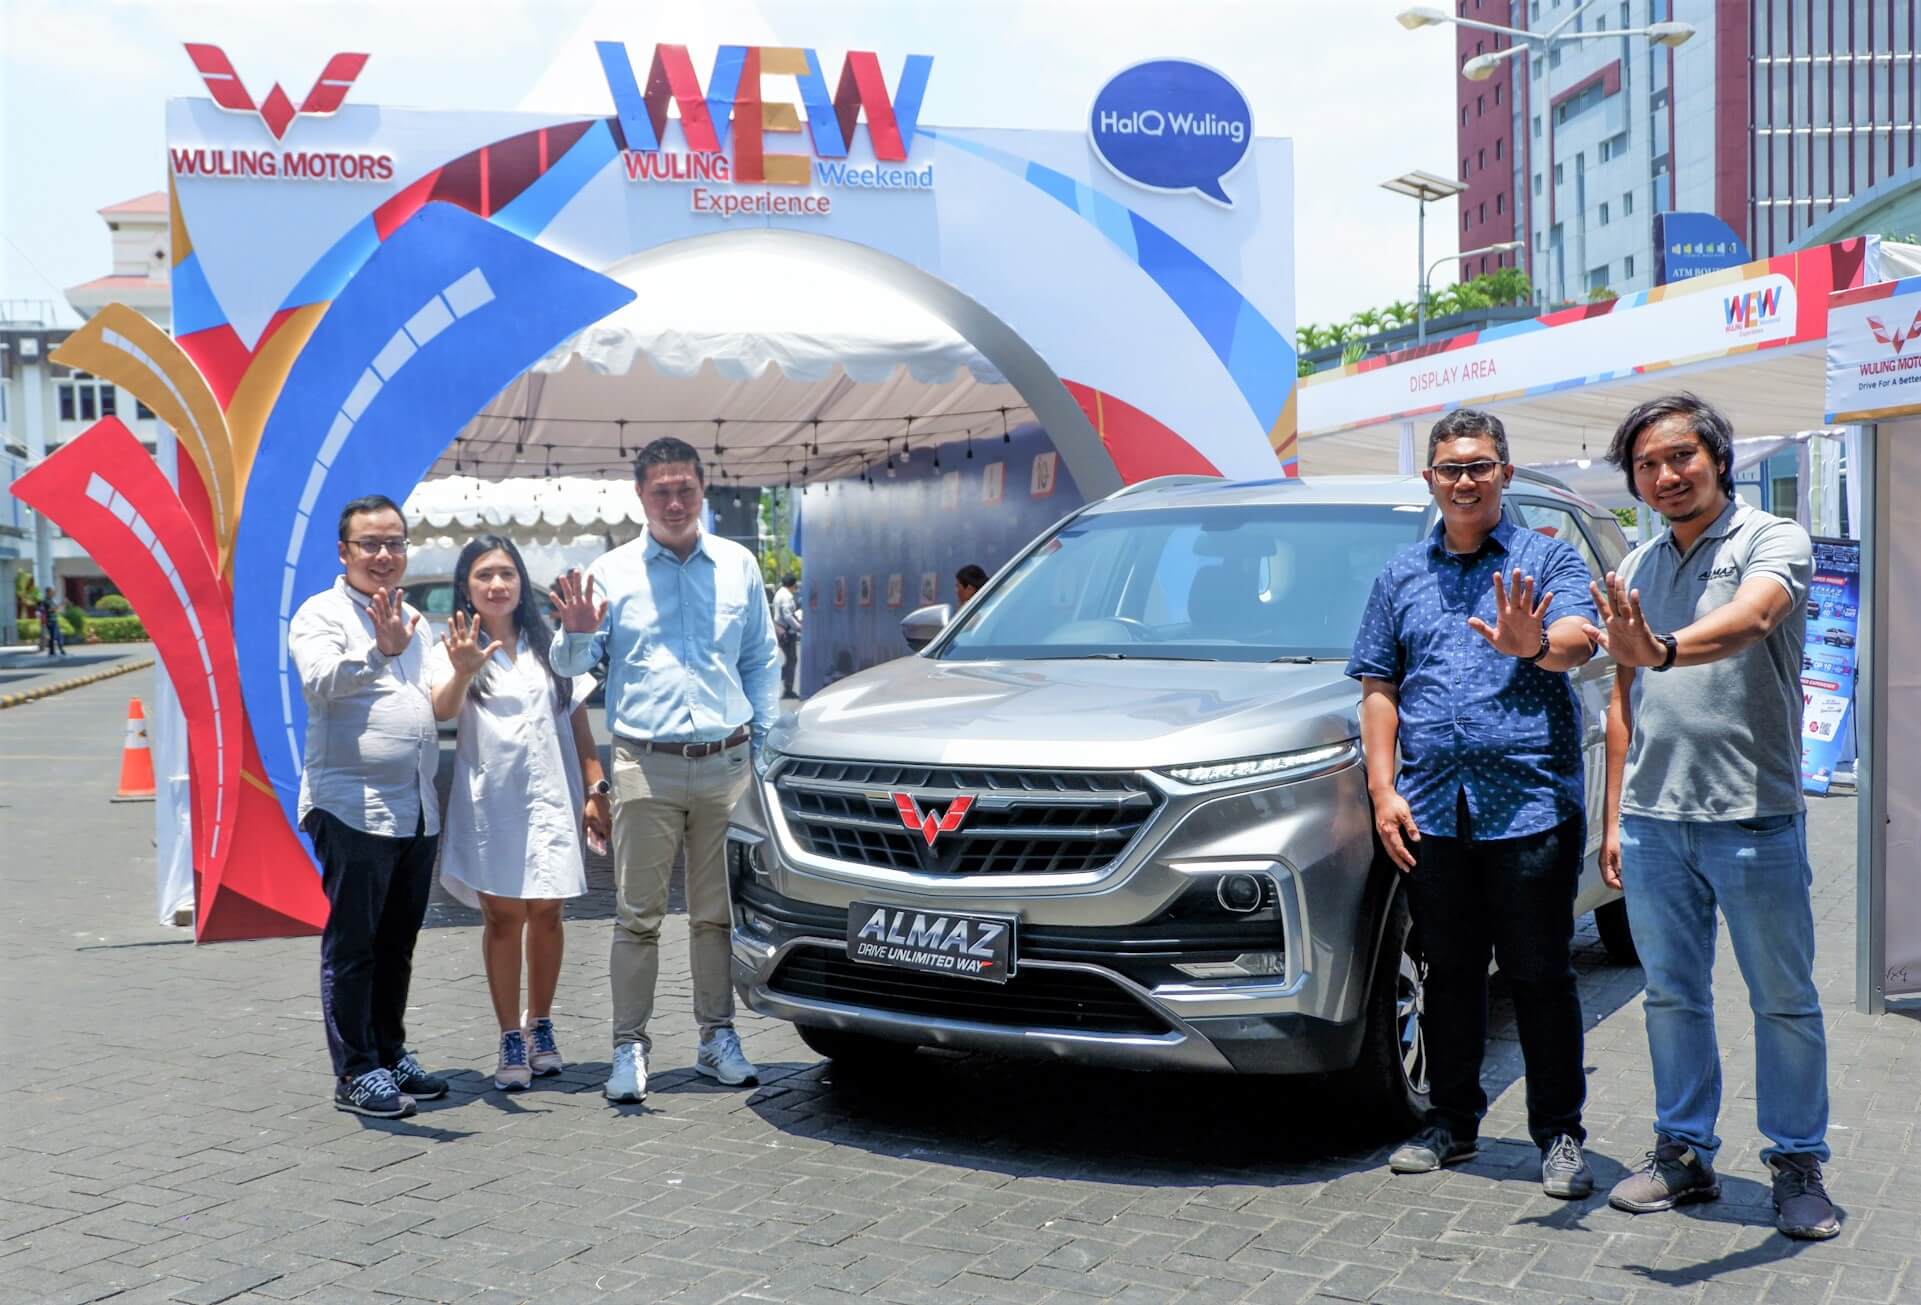 Image Manado Becomes Second City of Wuling Experience Weekend in Sulawesi